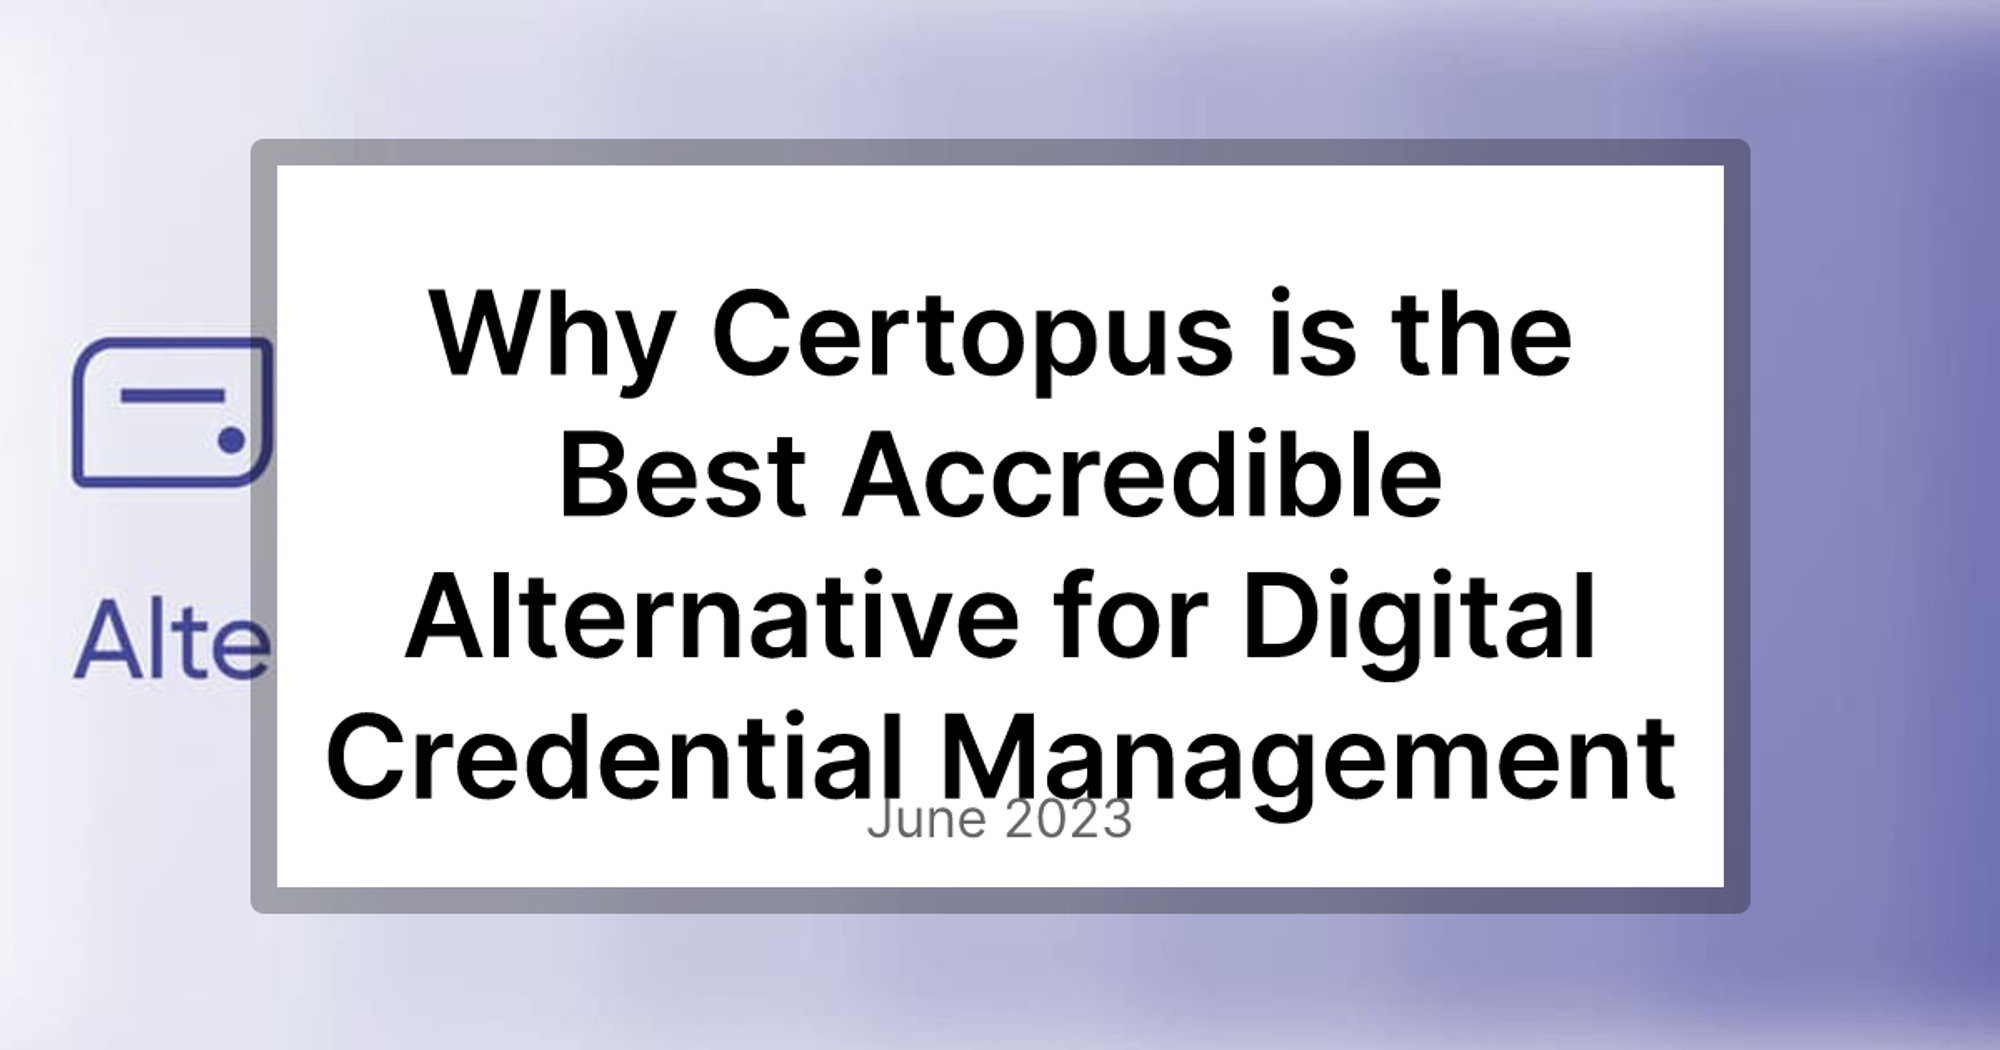 Why Certopus is the Best Accredible Alternative for Digital Credential Management